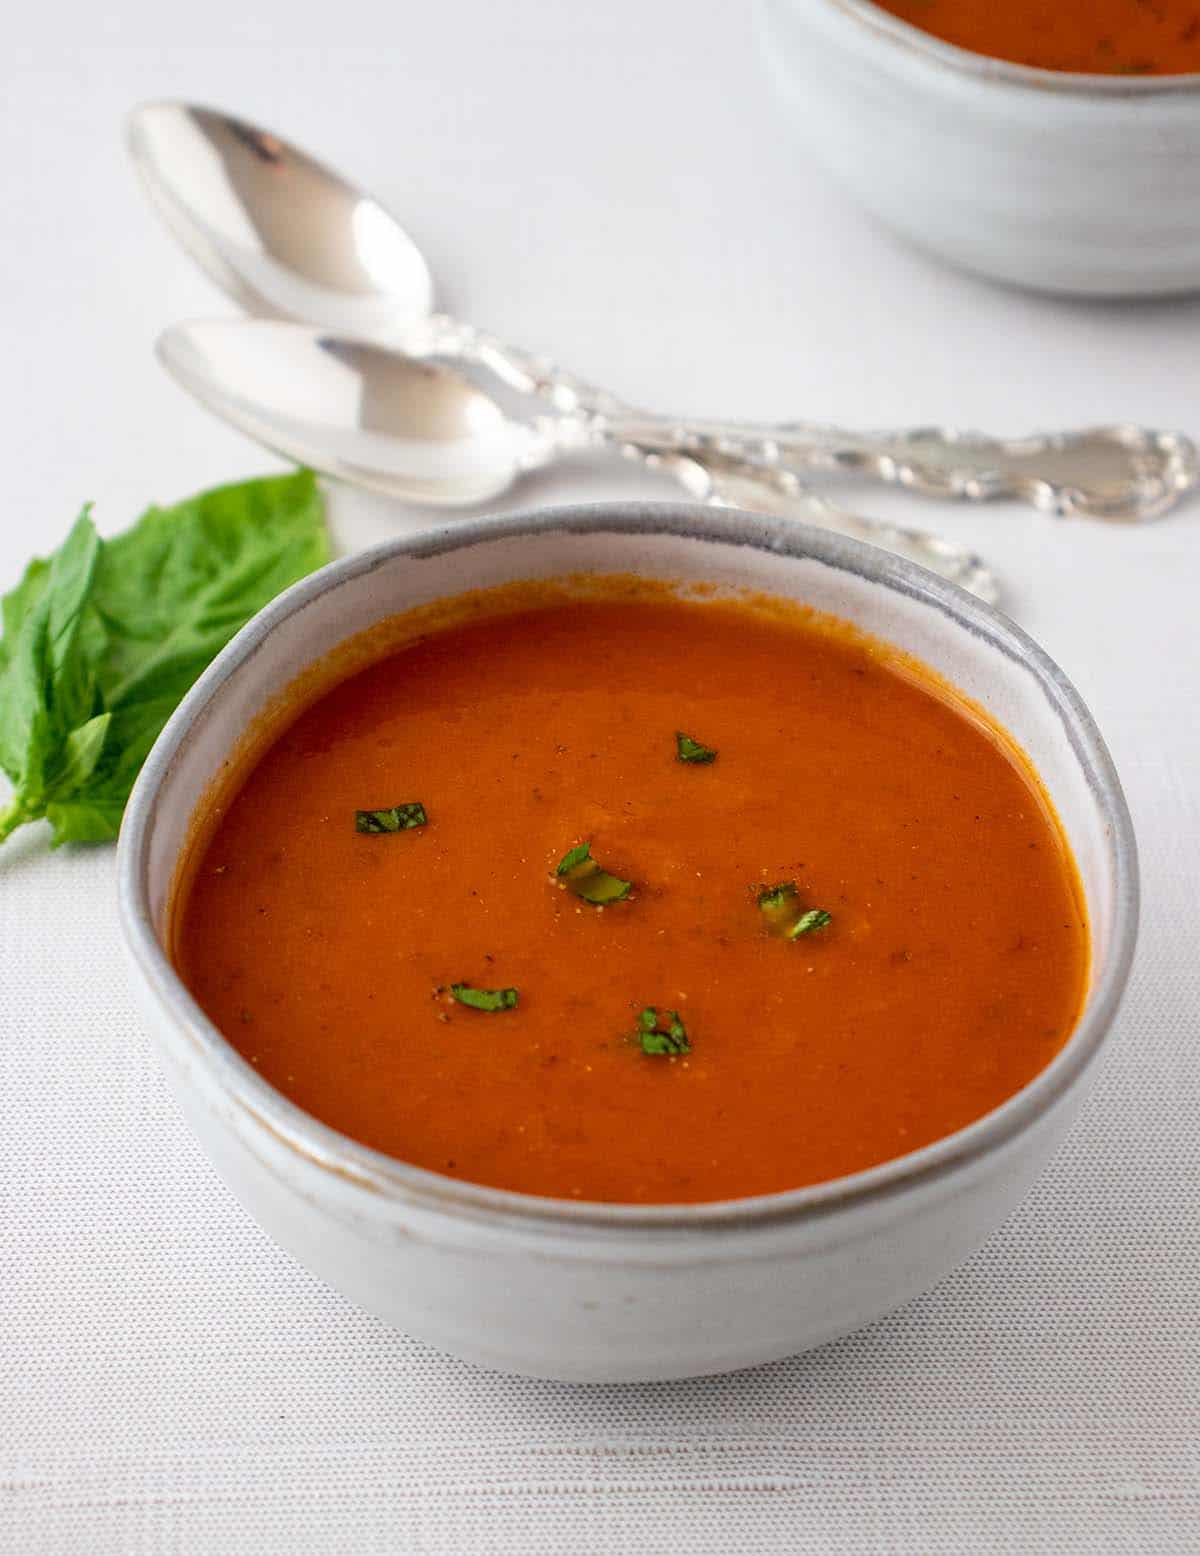 vegan tomato soup in a grey bowl garnished with chopped fresh basil and black pepper. Fresh basil in the background along with silver spoons.